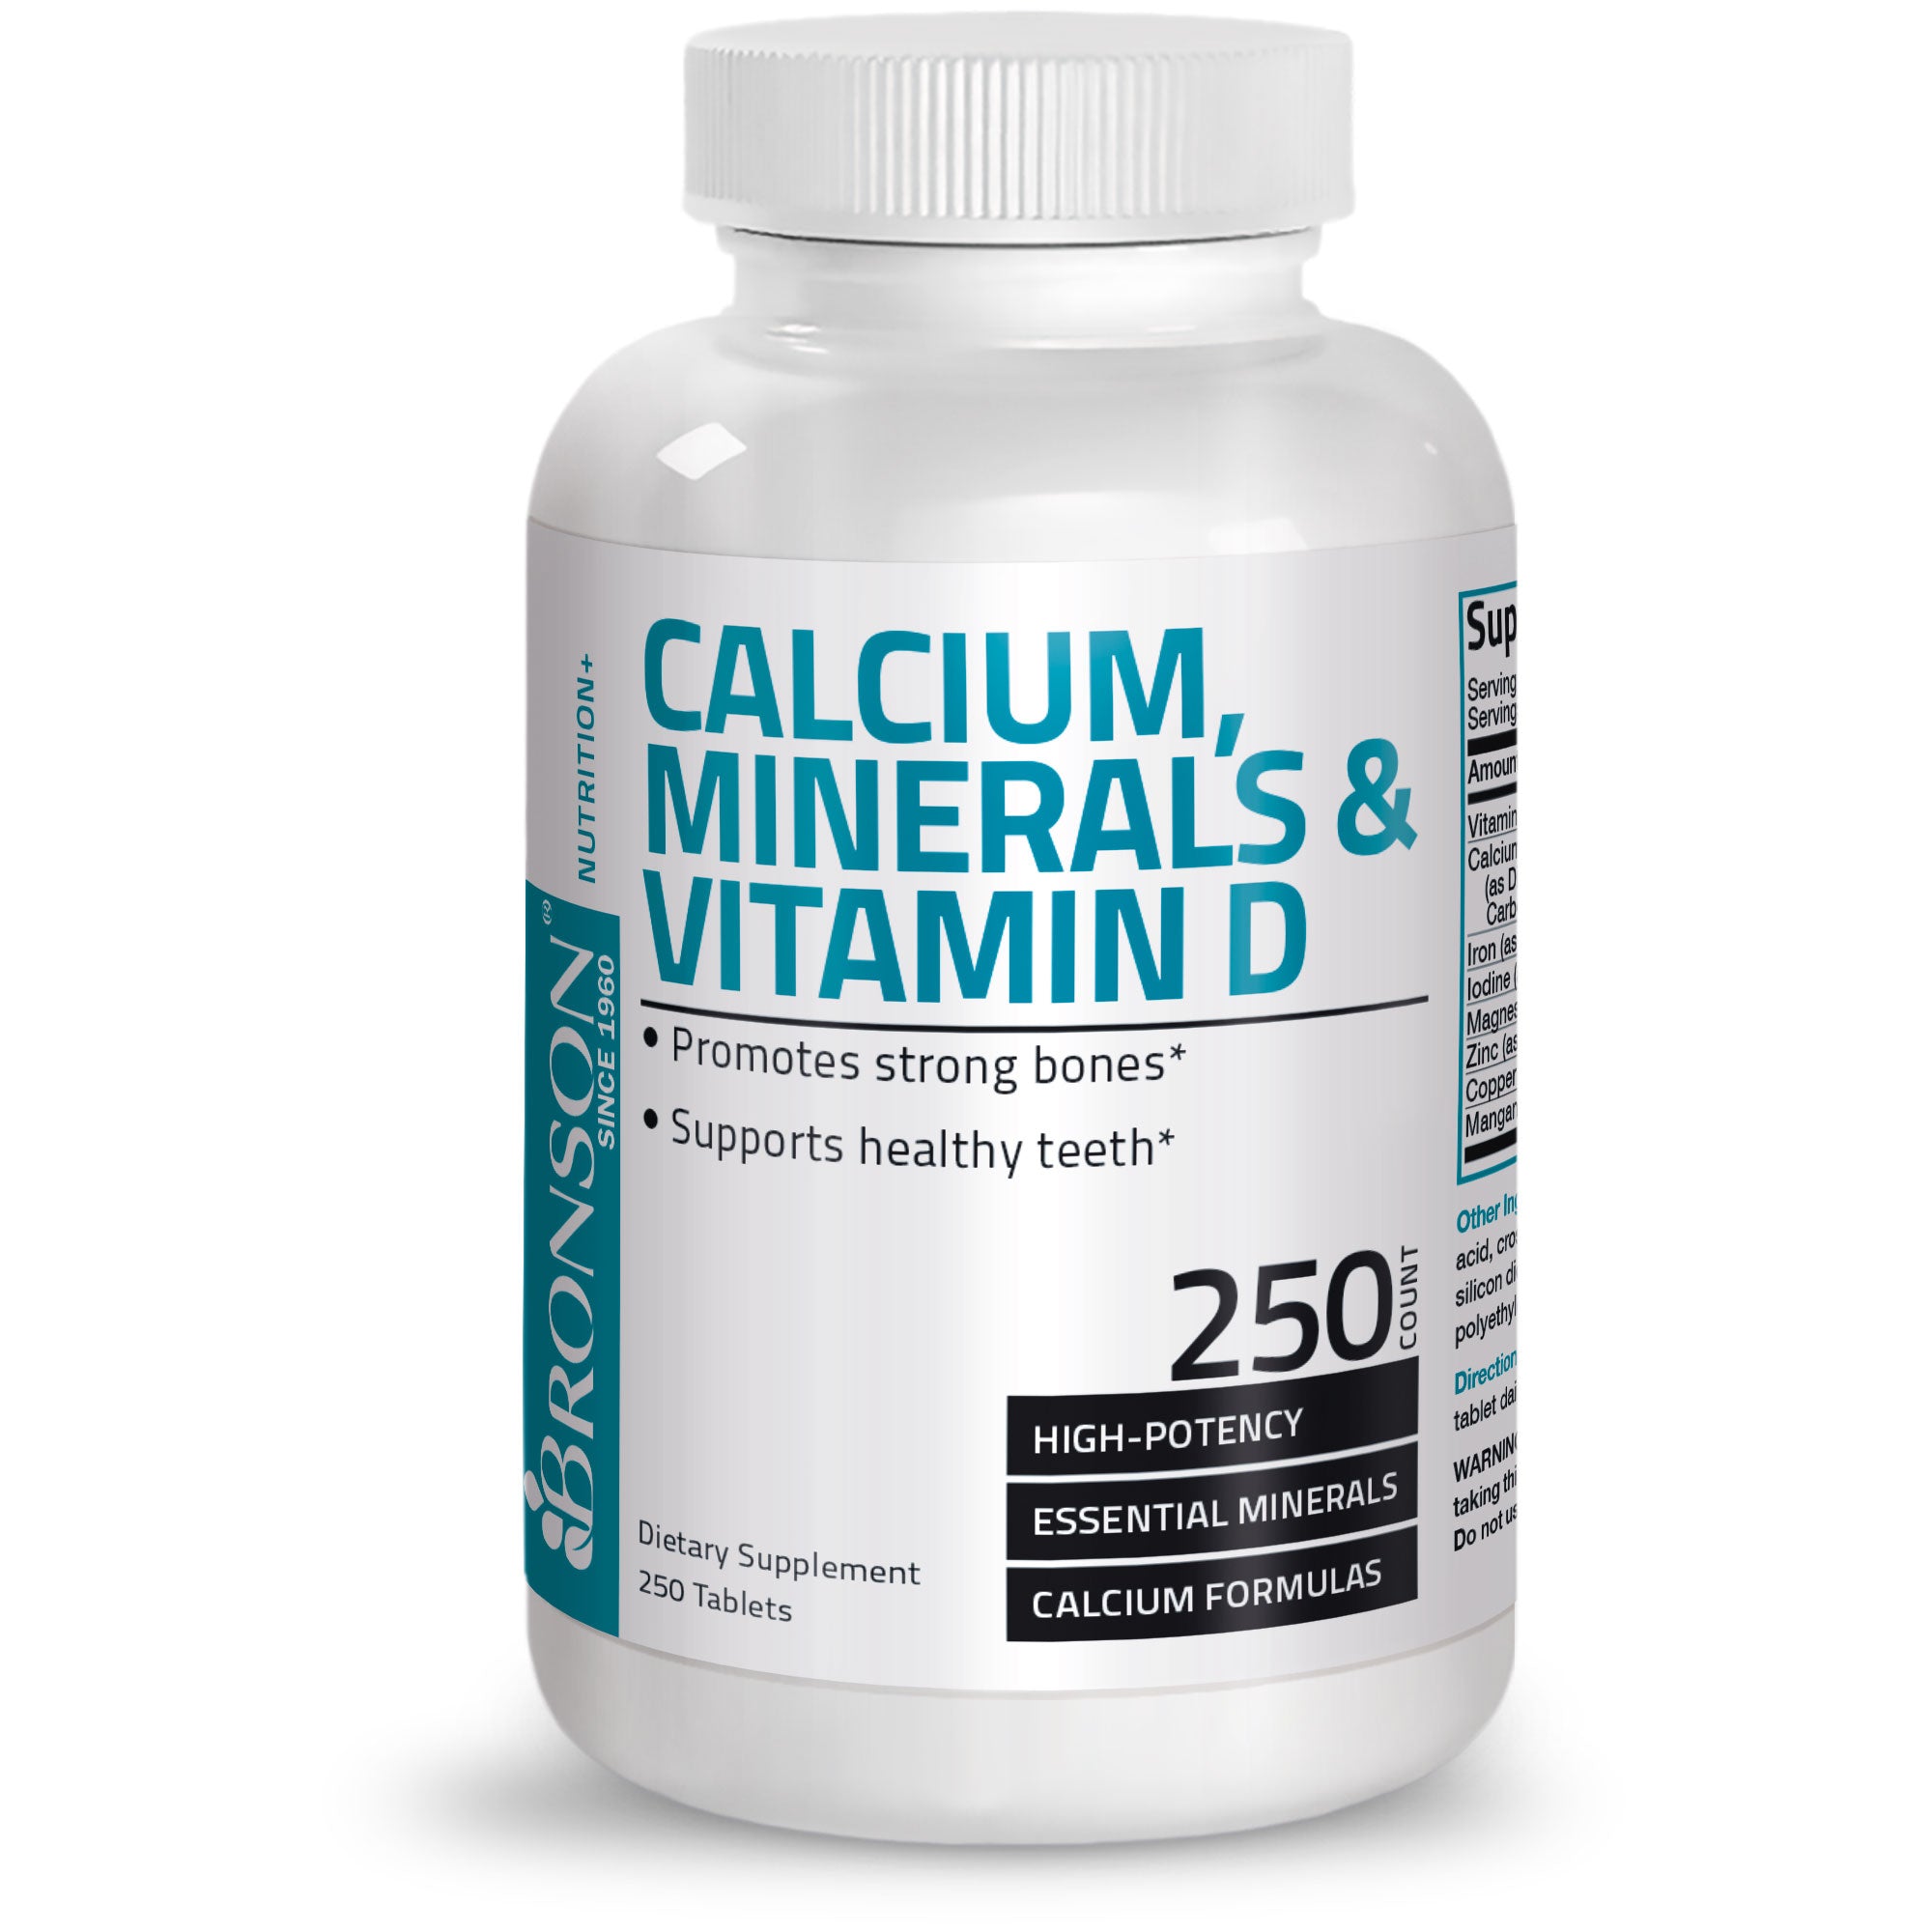 Calcium with Minerals and Vitamin D - 250 Tablets view 1 of 4